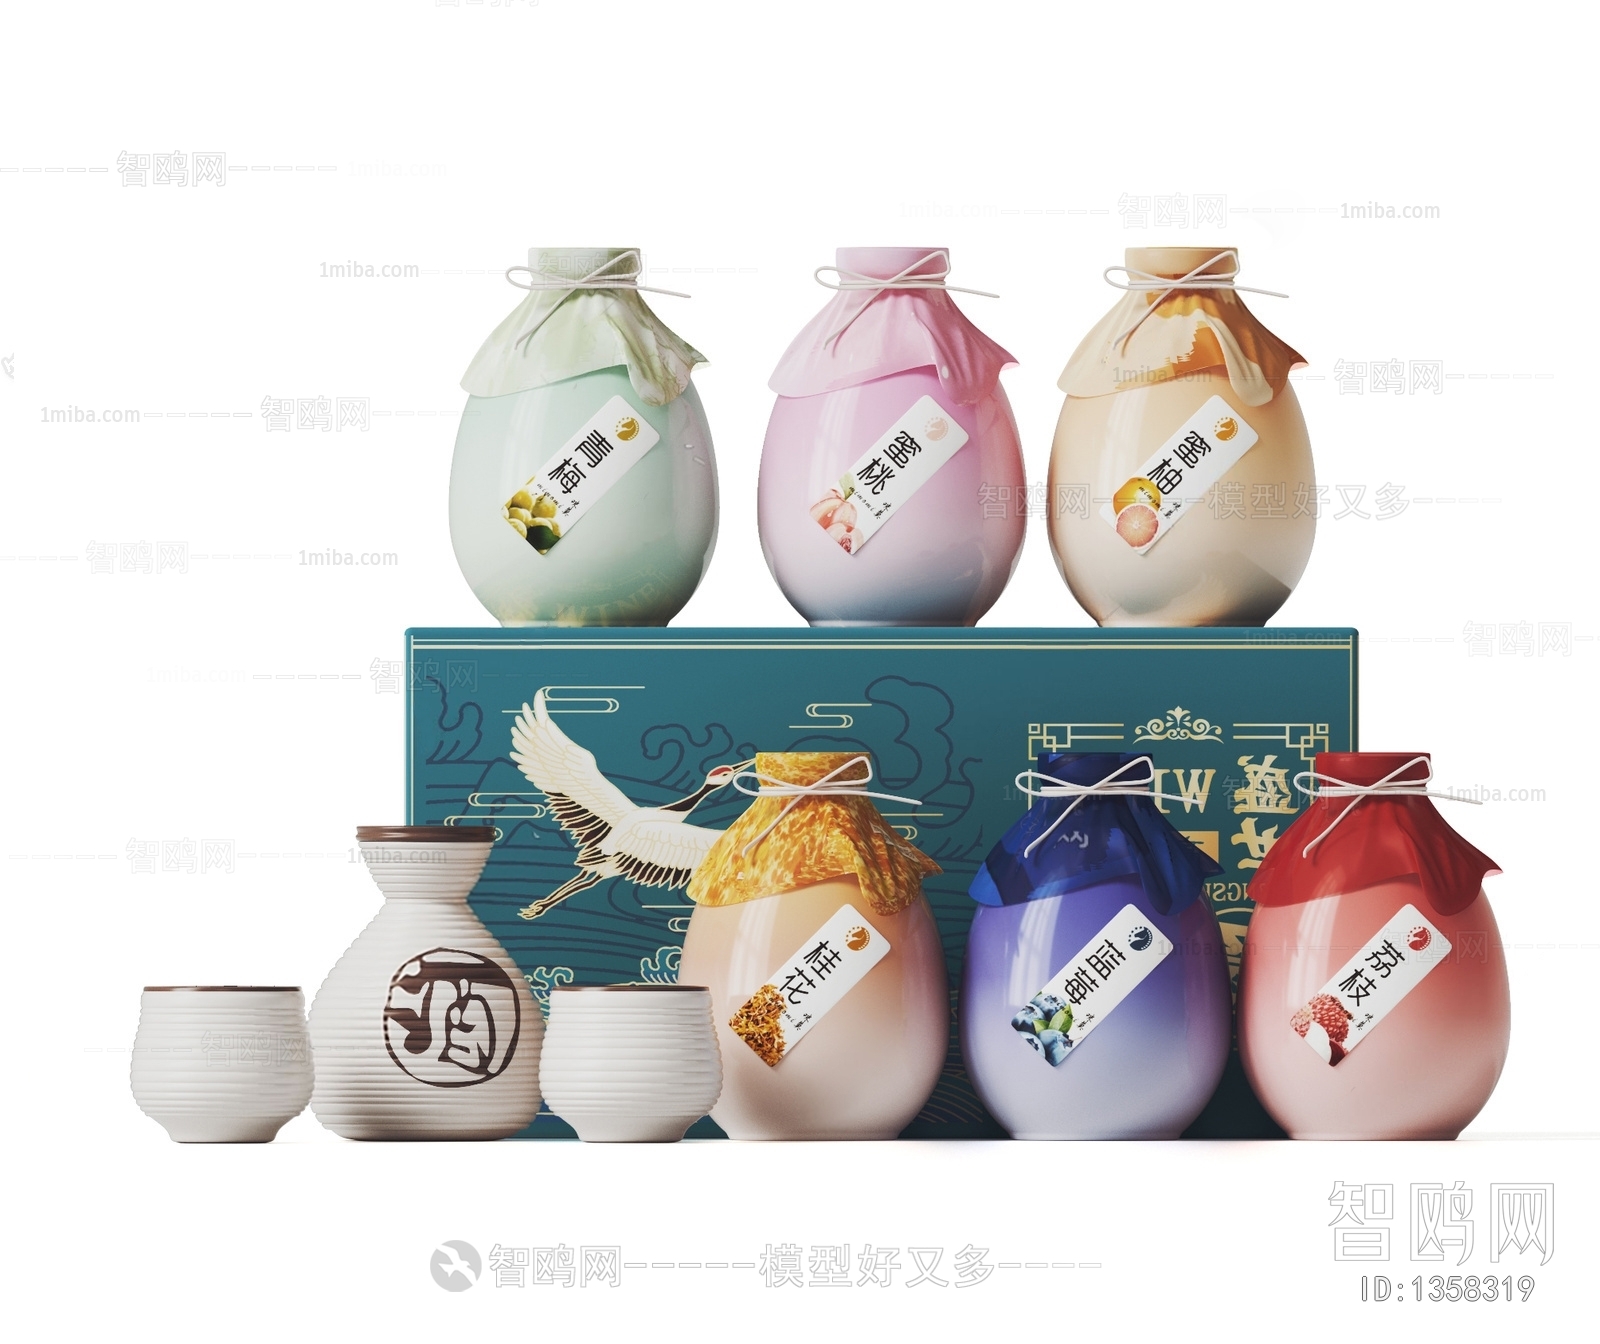 New Chinese Style Bottles